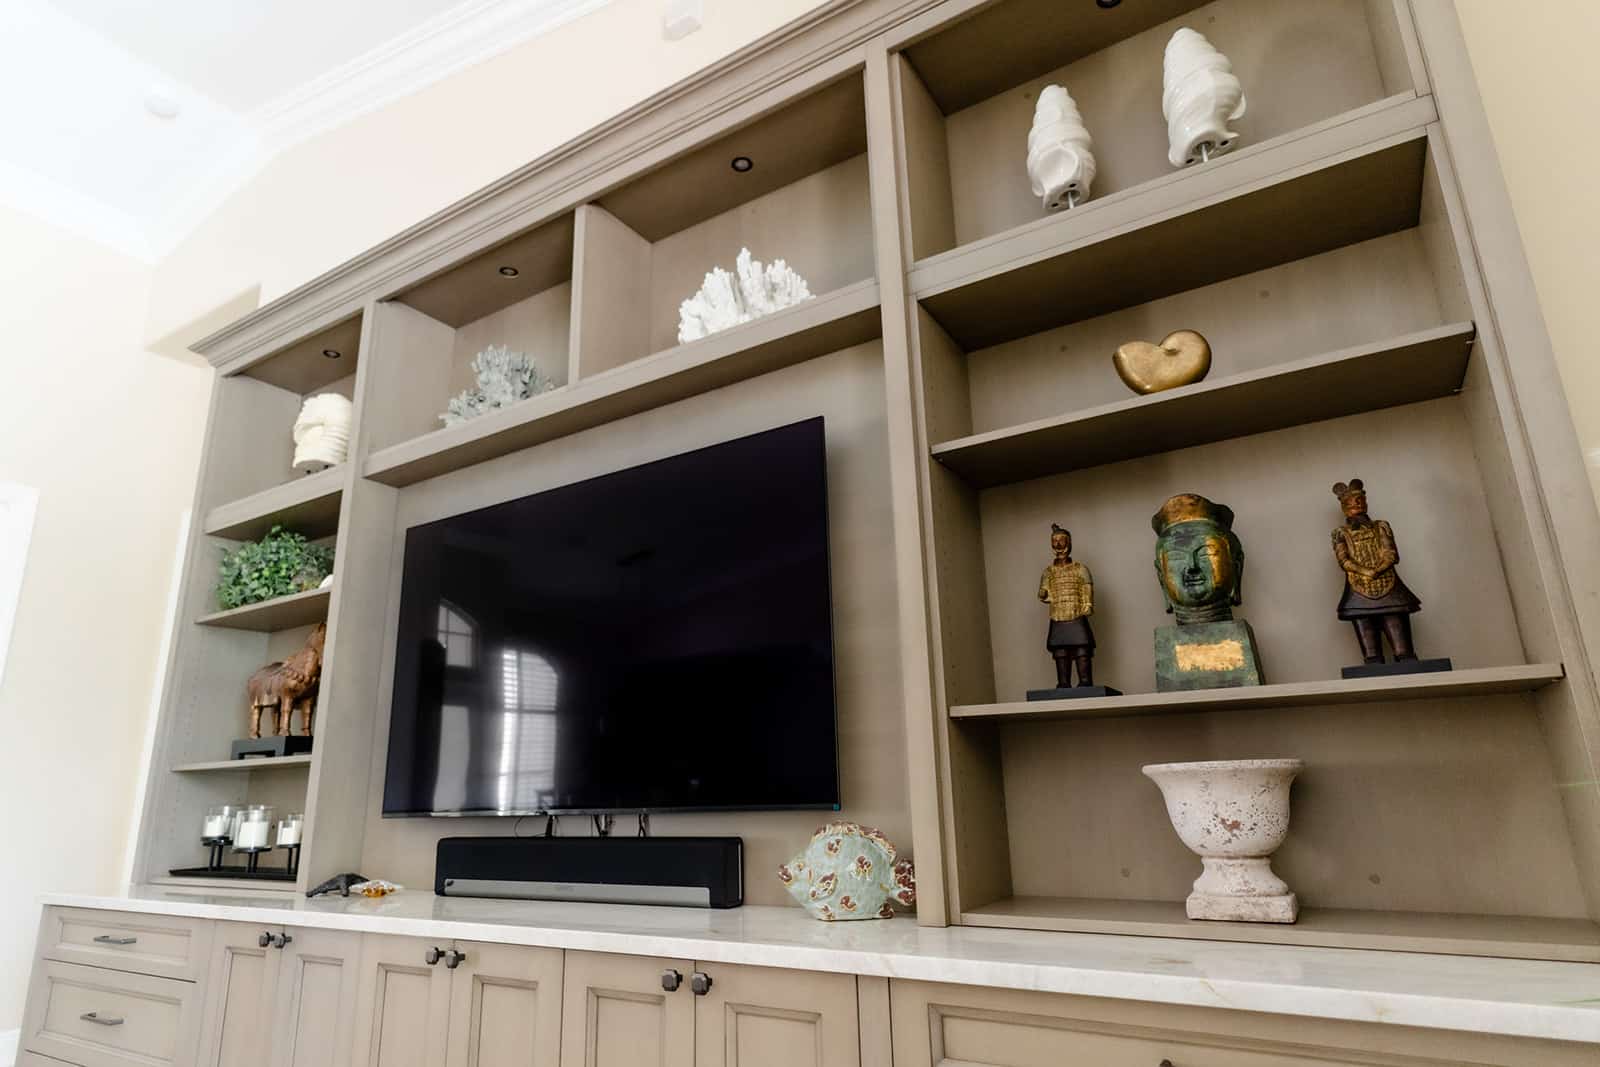 Built-Ins & Cabinetry Features